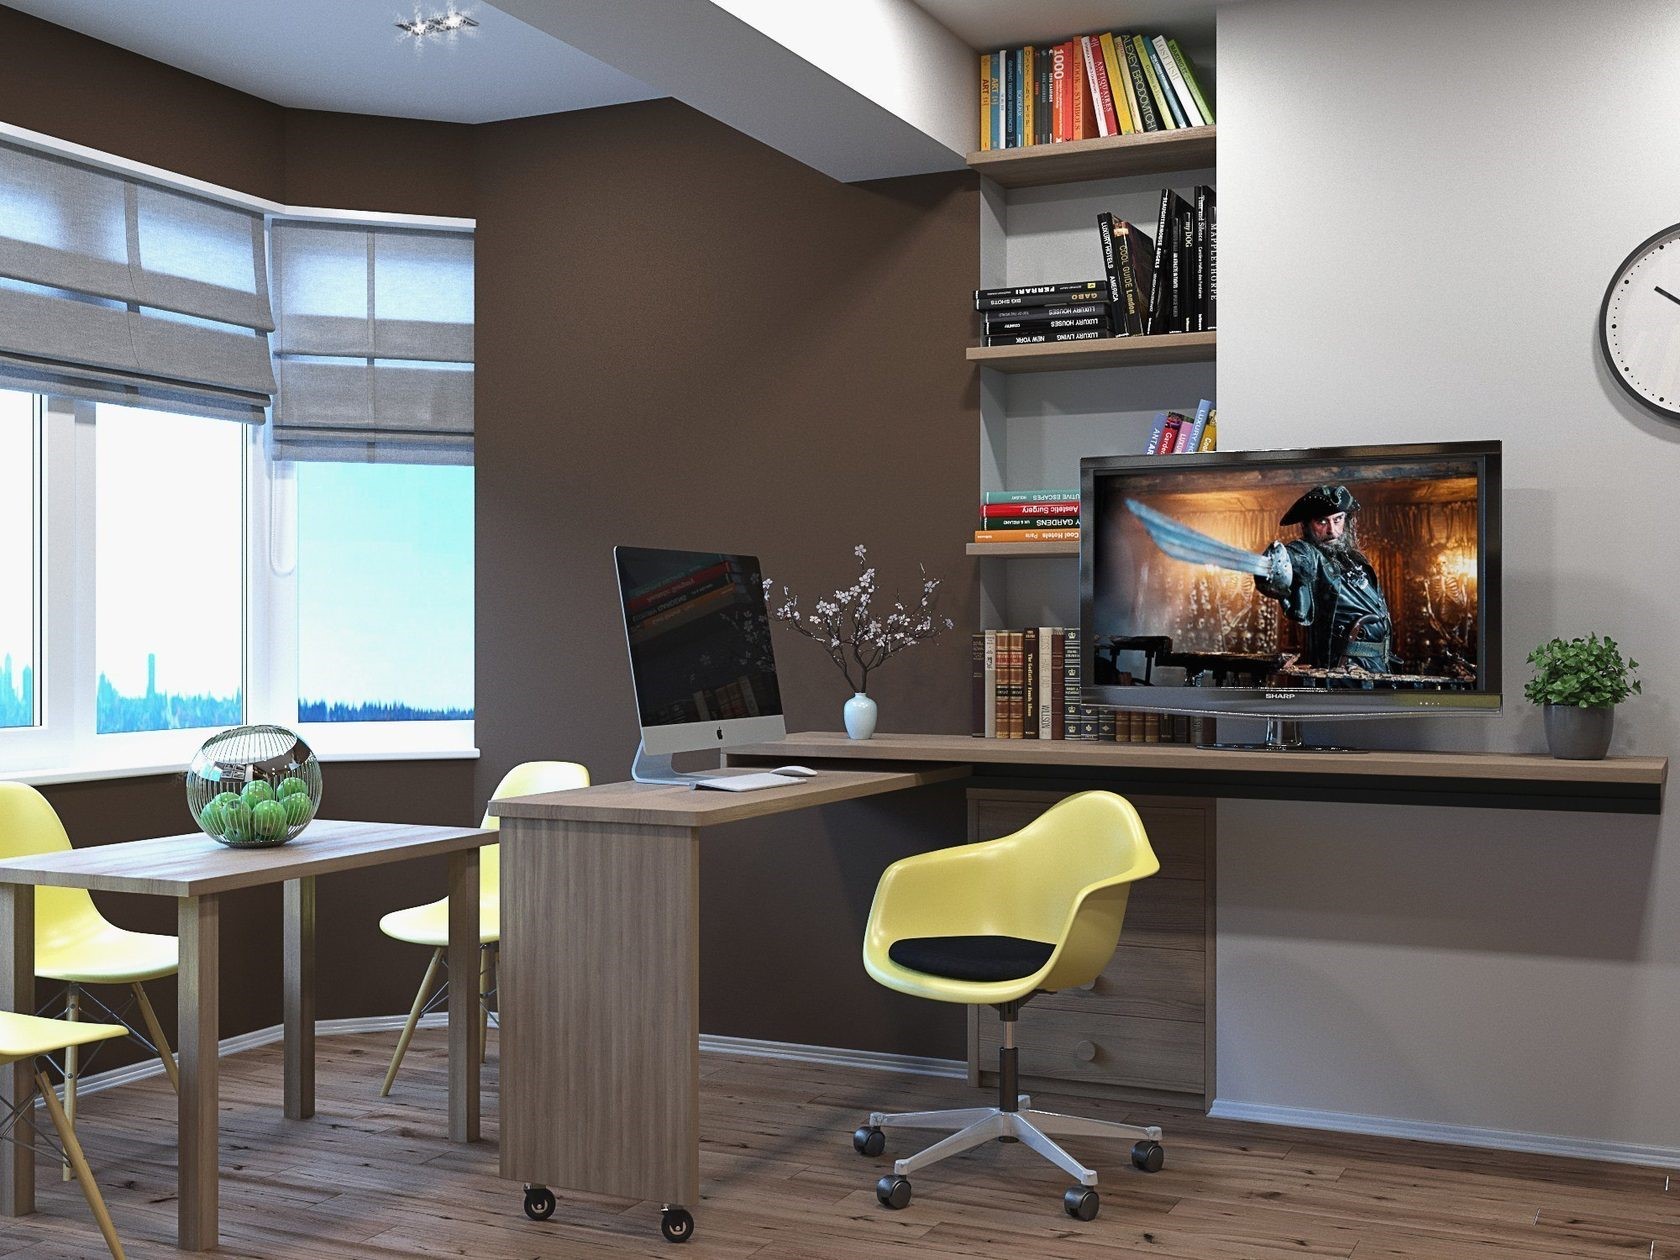 How to design a home office